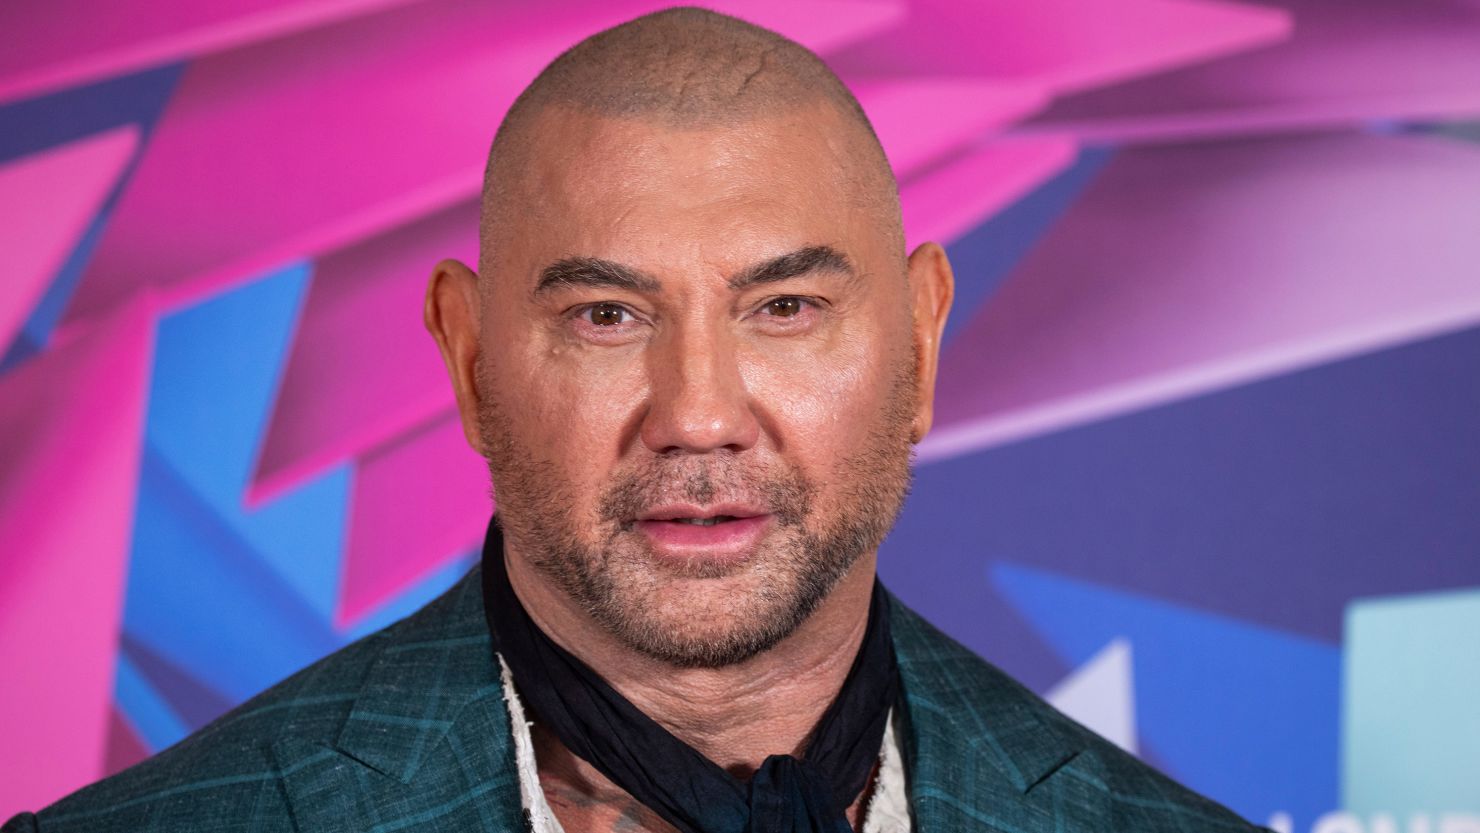 Dave Bautista poses for photographers upon arrival at the photo call for the film "Glass Onion: A Knives Out Mystery" in October.